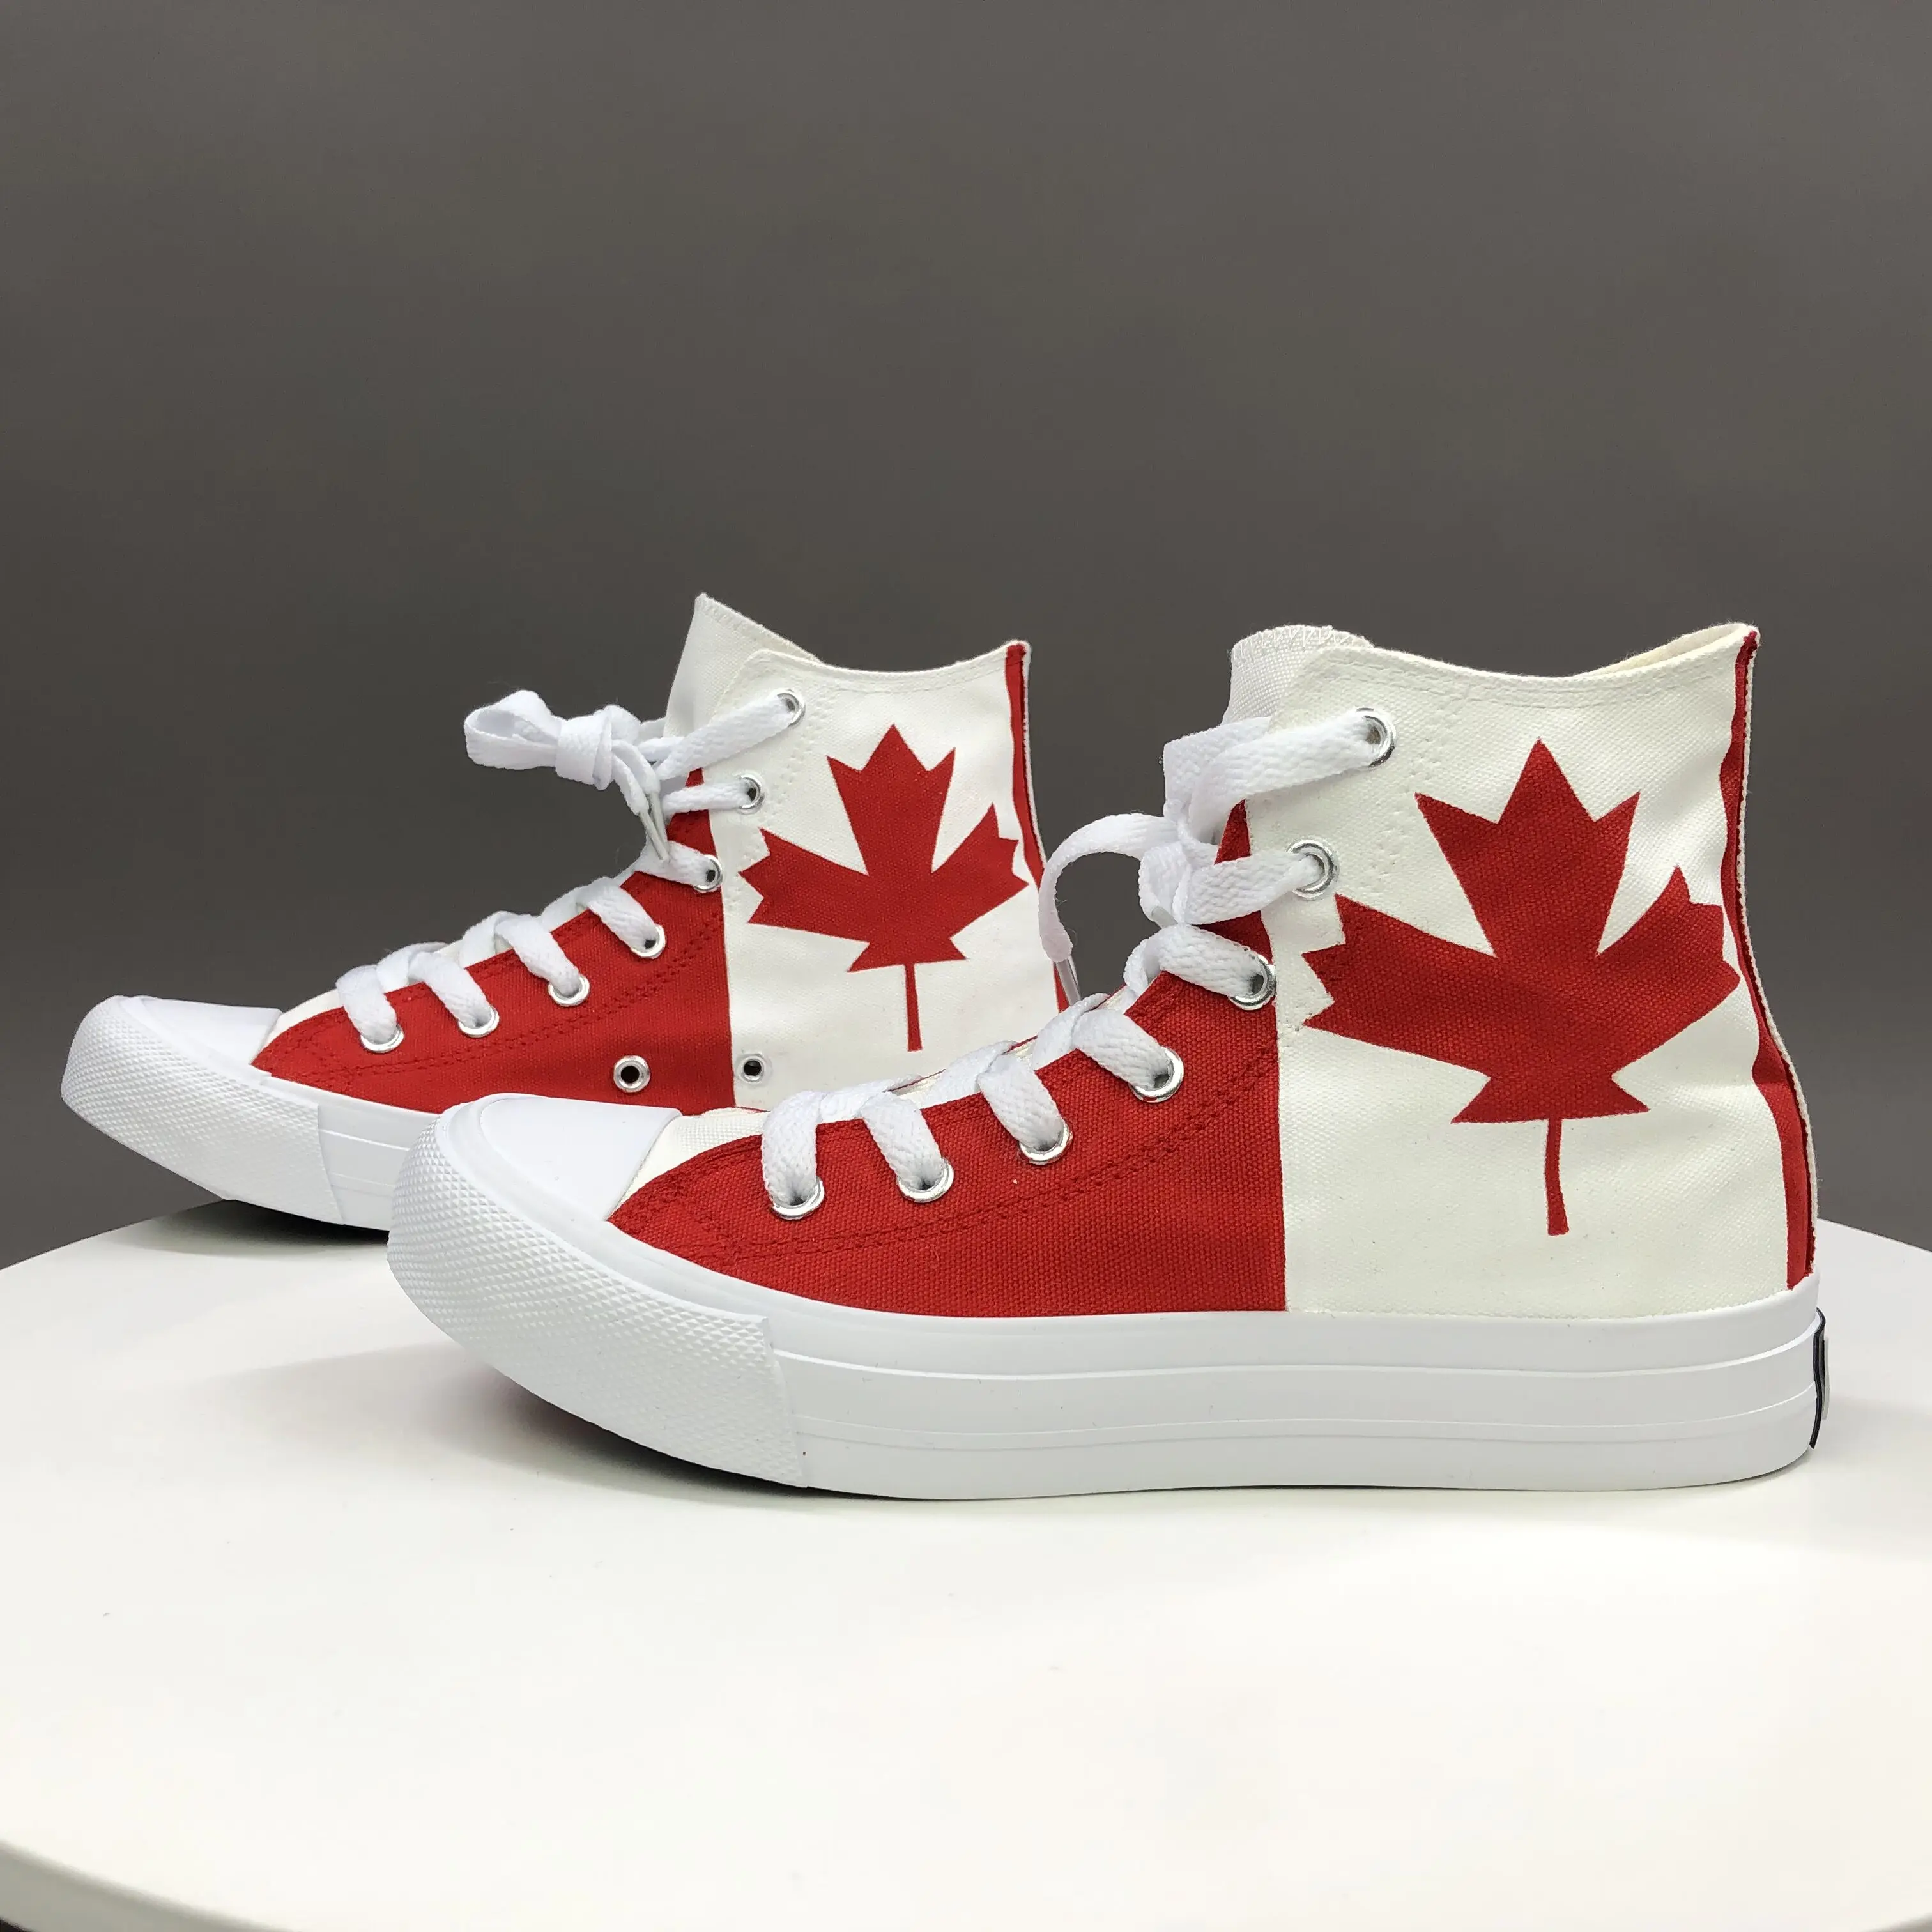 Wen Design Custom Canada Flag Maple Leaf Hand Painted Canvas Shoes Unisex  Flattie High Top Lace Up Female Male Casual Sneaker|sneakers  designer|sneakers casualsneakers sneakers - AliExpress